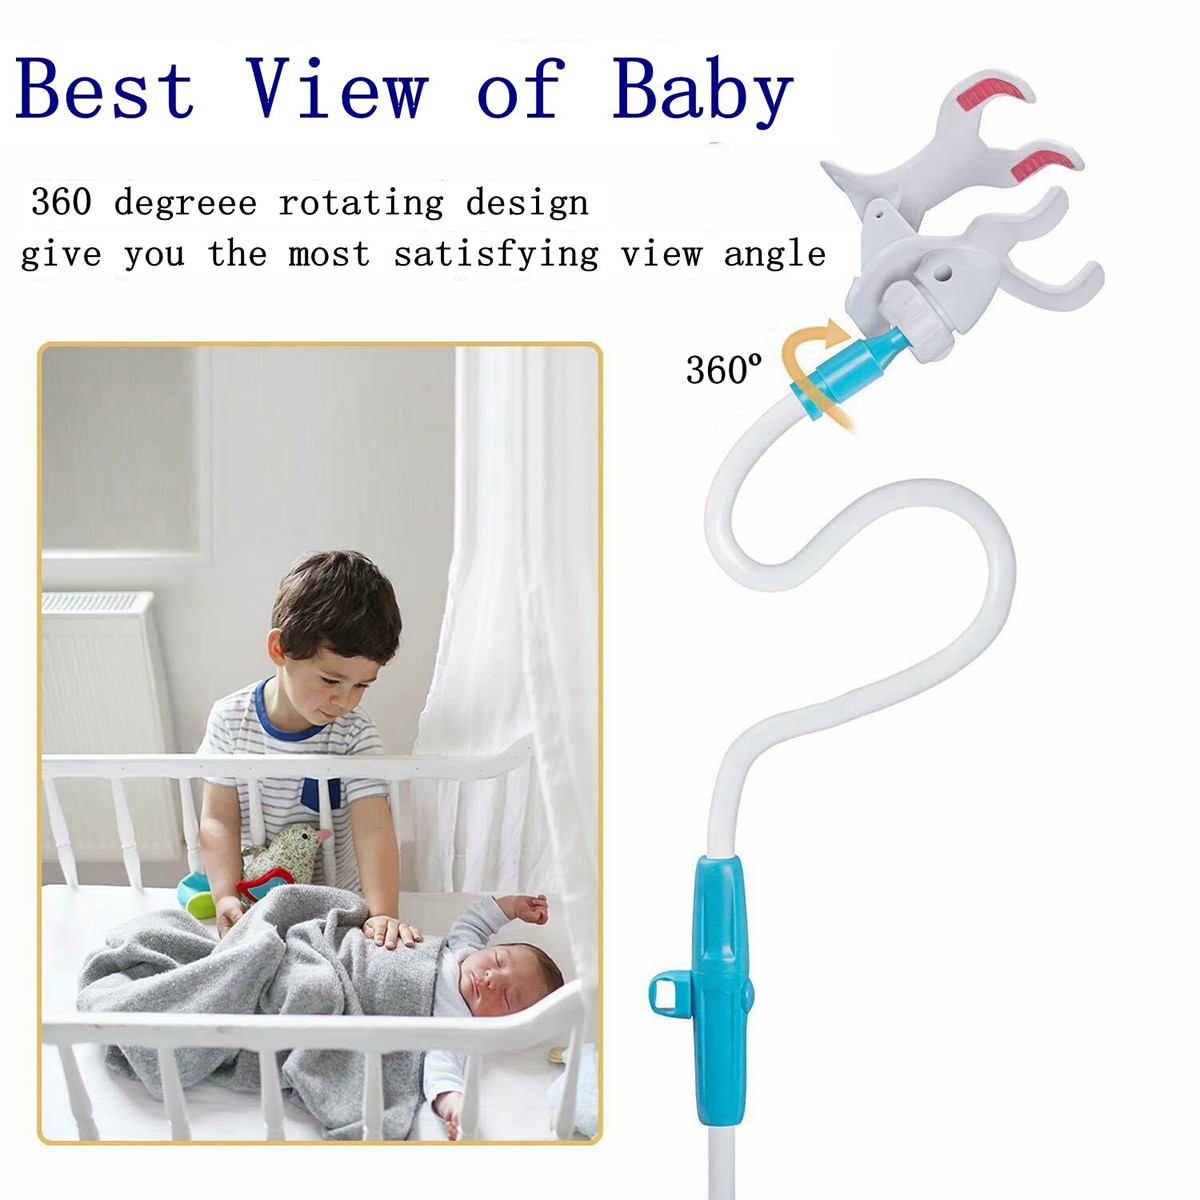 Multifunction Universal Phone Holder Stand Bed Lazy Cradle Long Arm Adjustable 105cm Baby Monitor Wall Mount Camera For Shelf